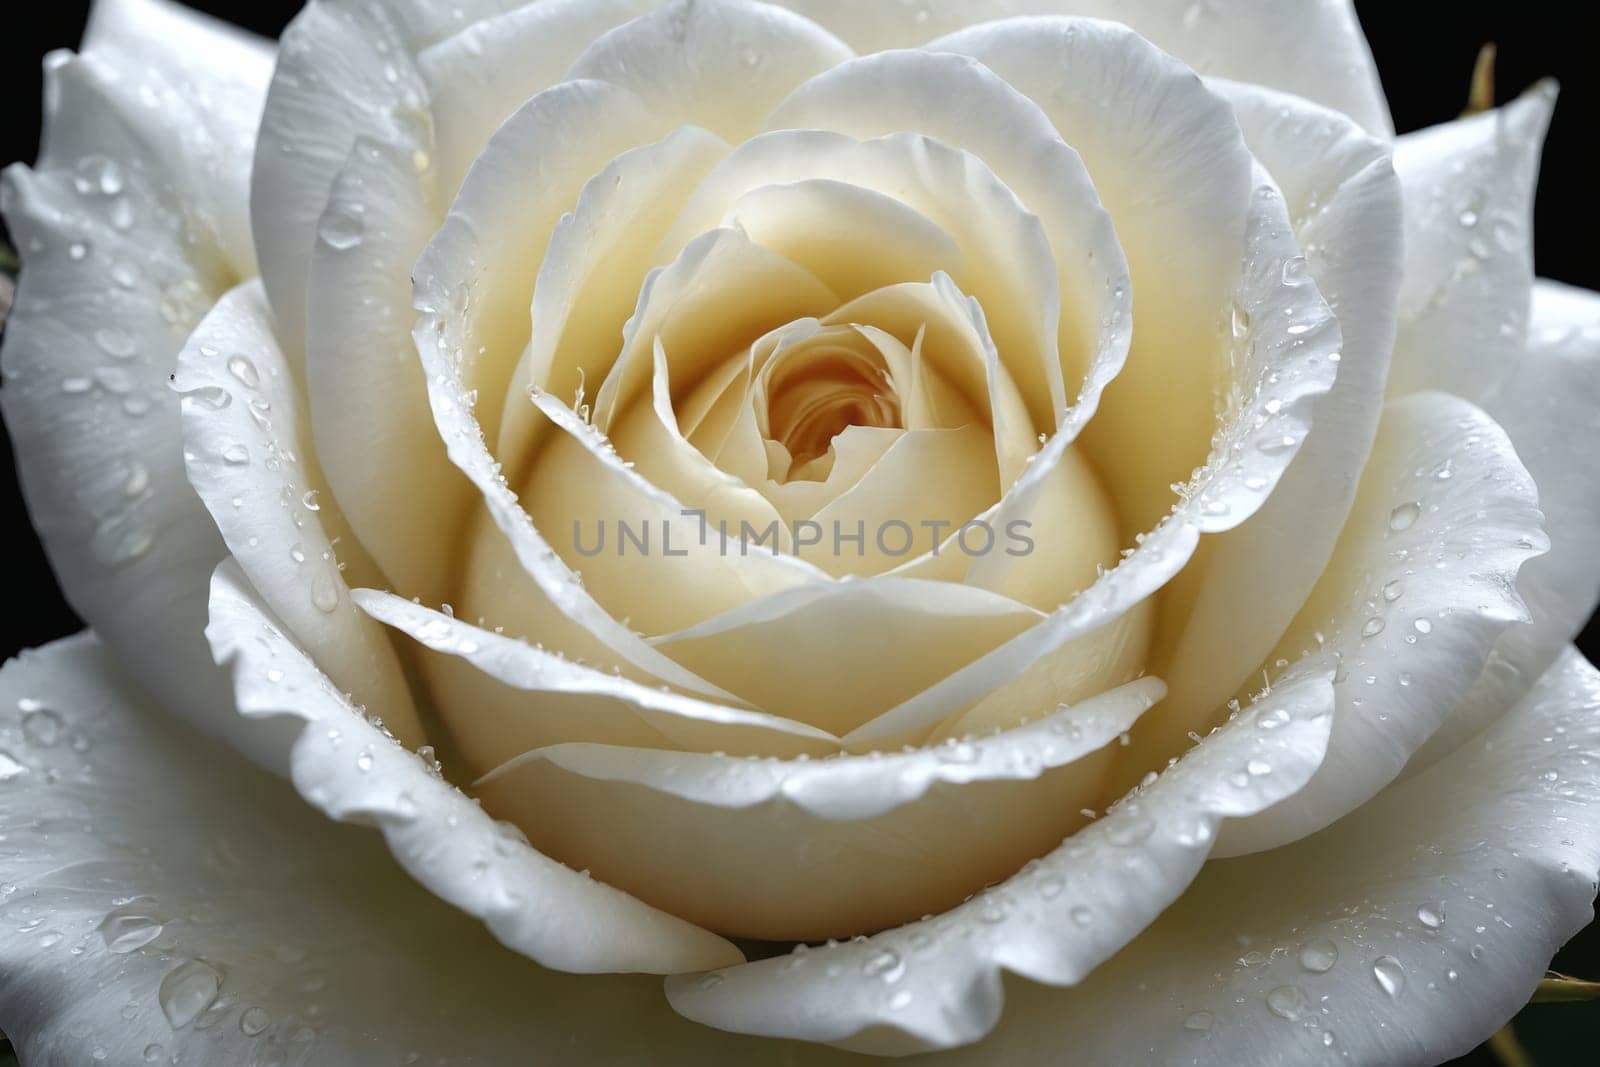 This image brilliantly showcases the contrasts of nature with a dew-drenched white rose poised beautifully against a stark, dark background. Suitable for use in romance and love-themed projects, or even as an inspirational piece in a variety of contexts.